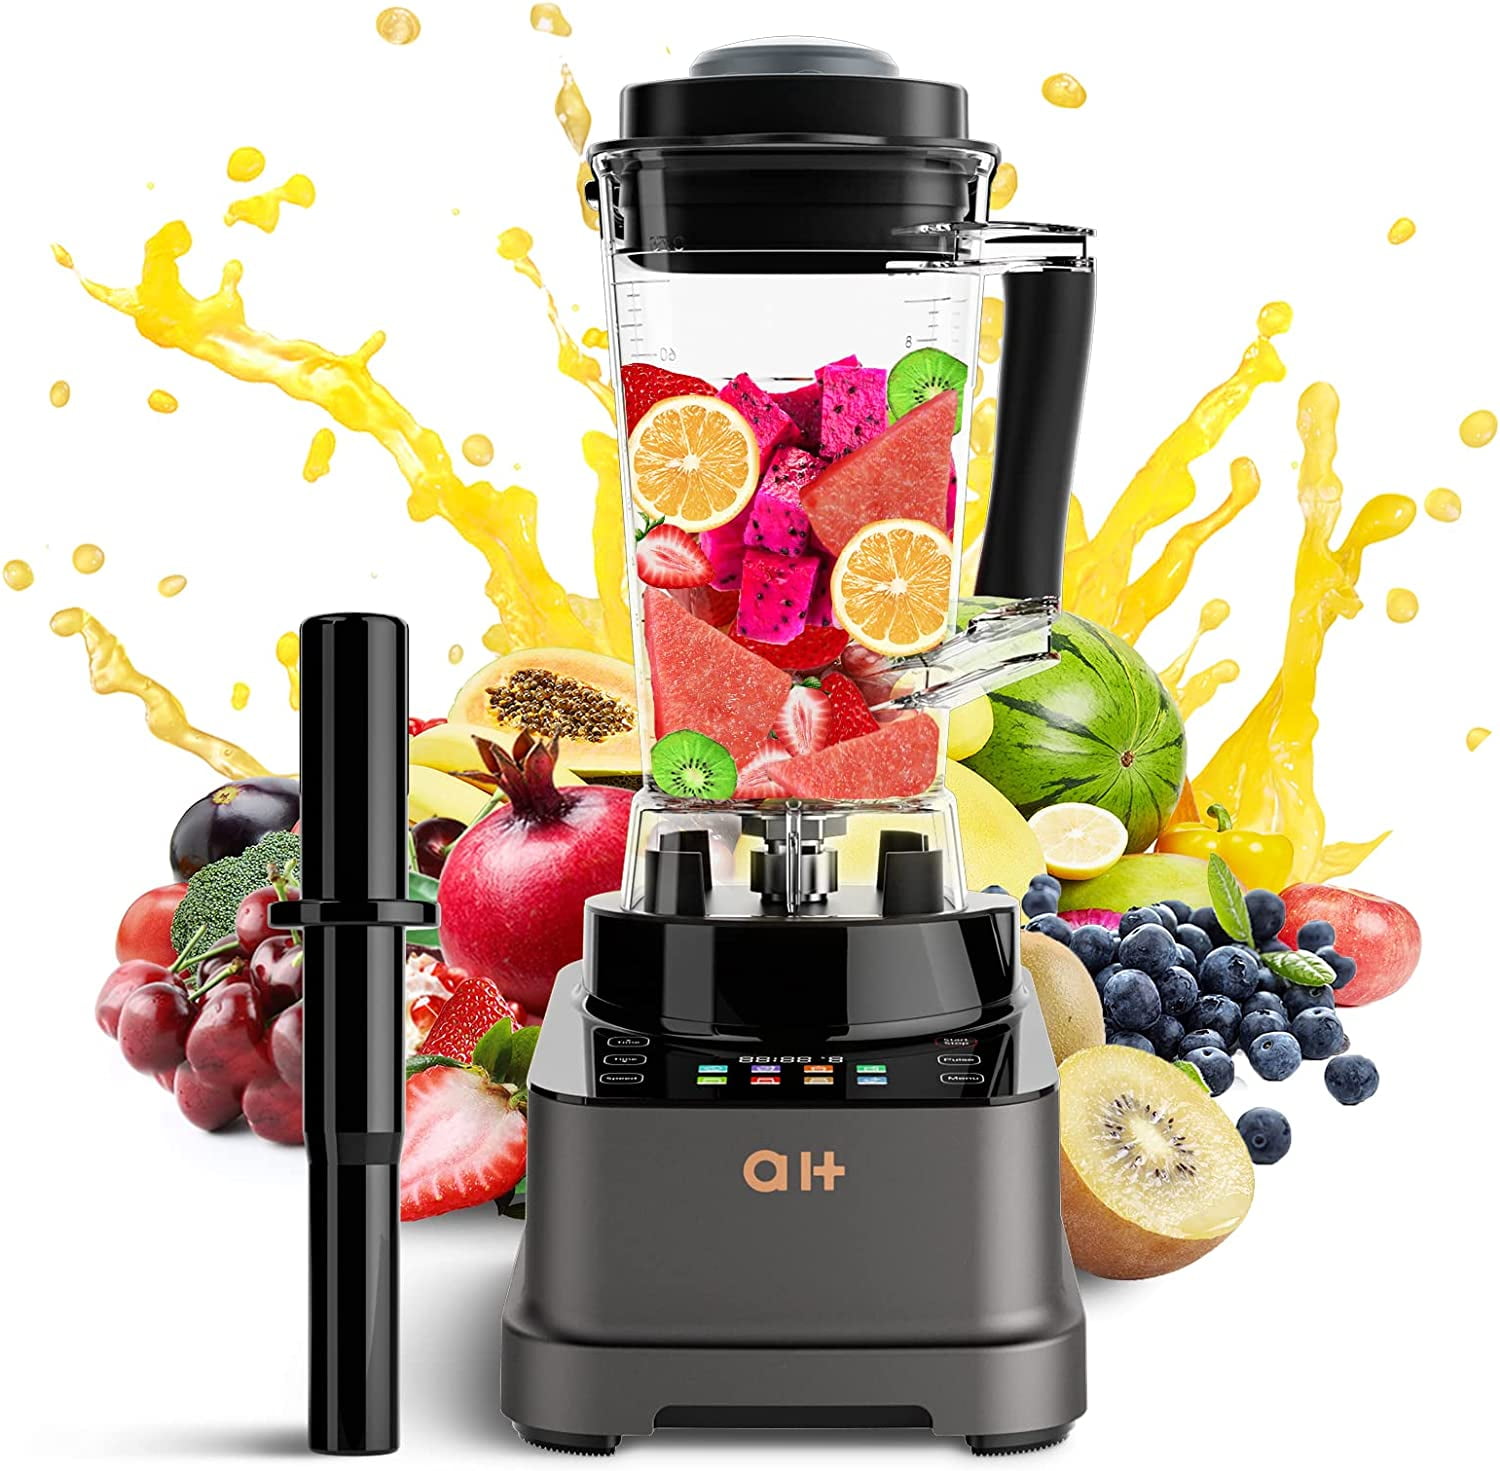 1200W Professional Blenders for Shakes and oz Countertop Blenders for Kitchen with Variable Speeds Control and 8 Presets,Total Crushing Technology for Ice,Frozen Fruit and Nuts. -